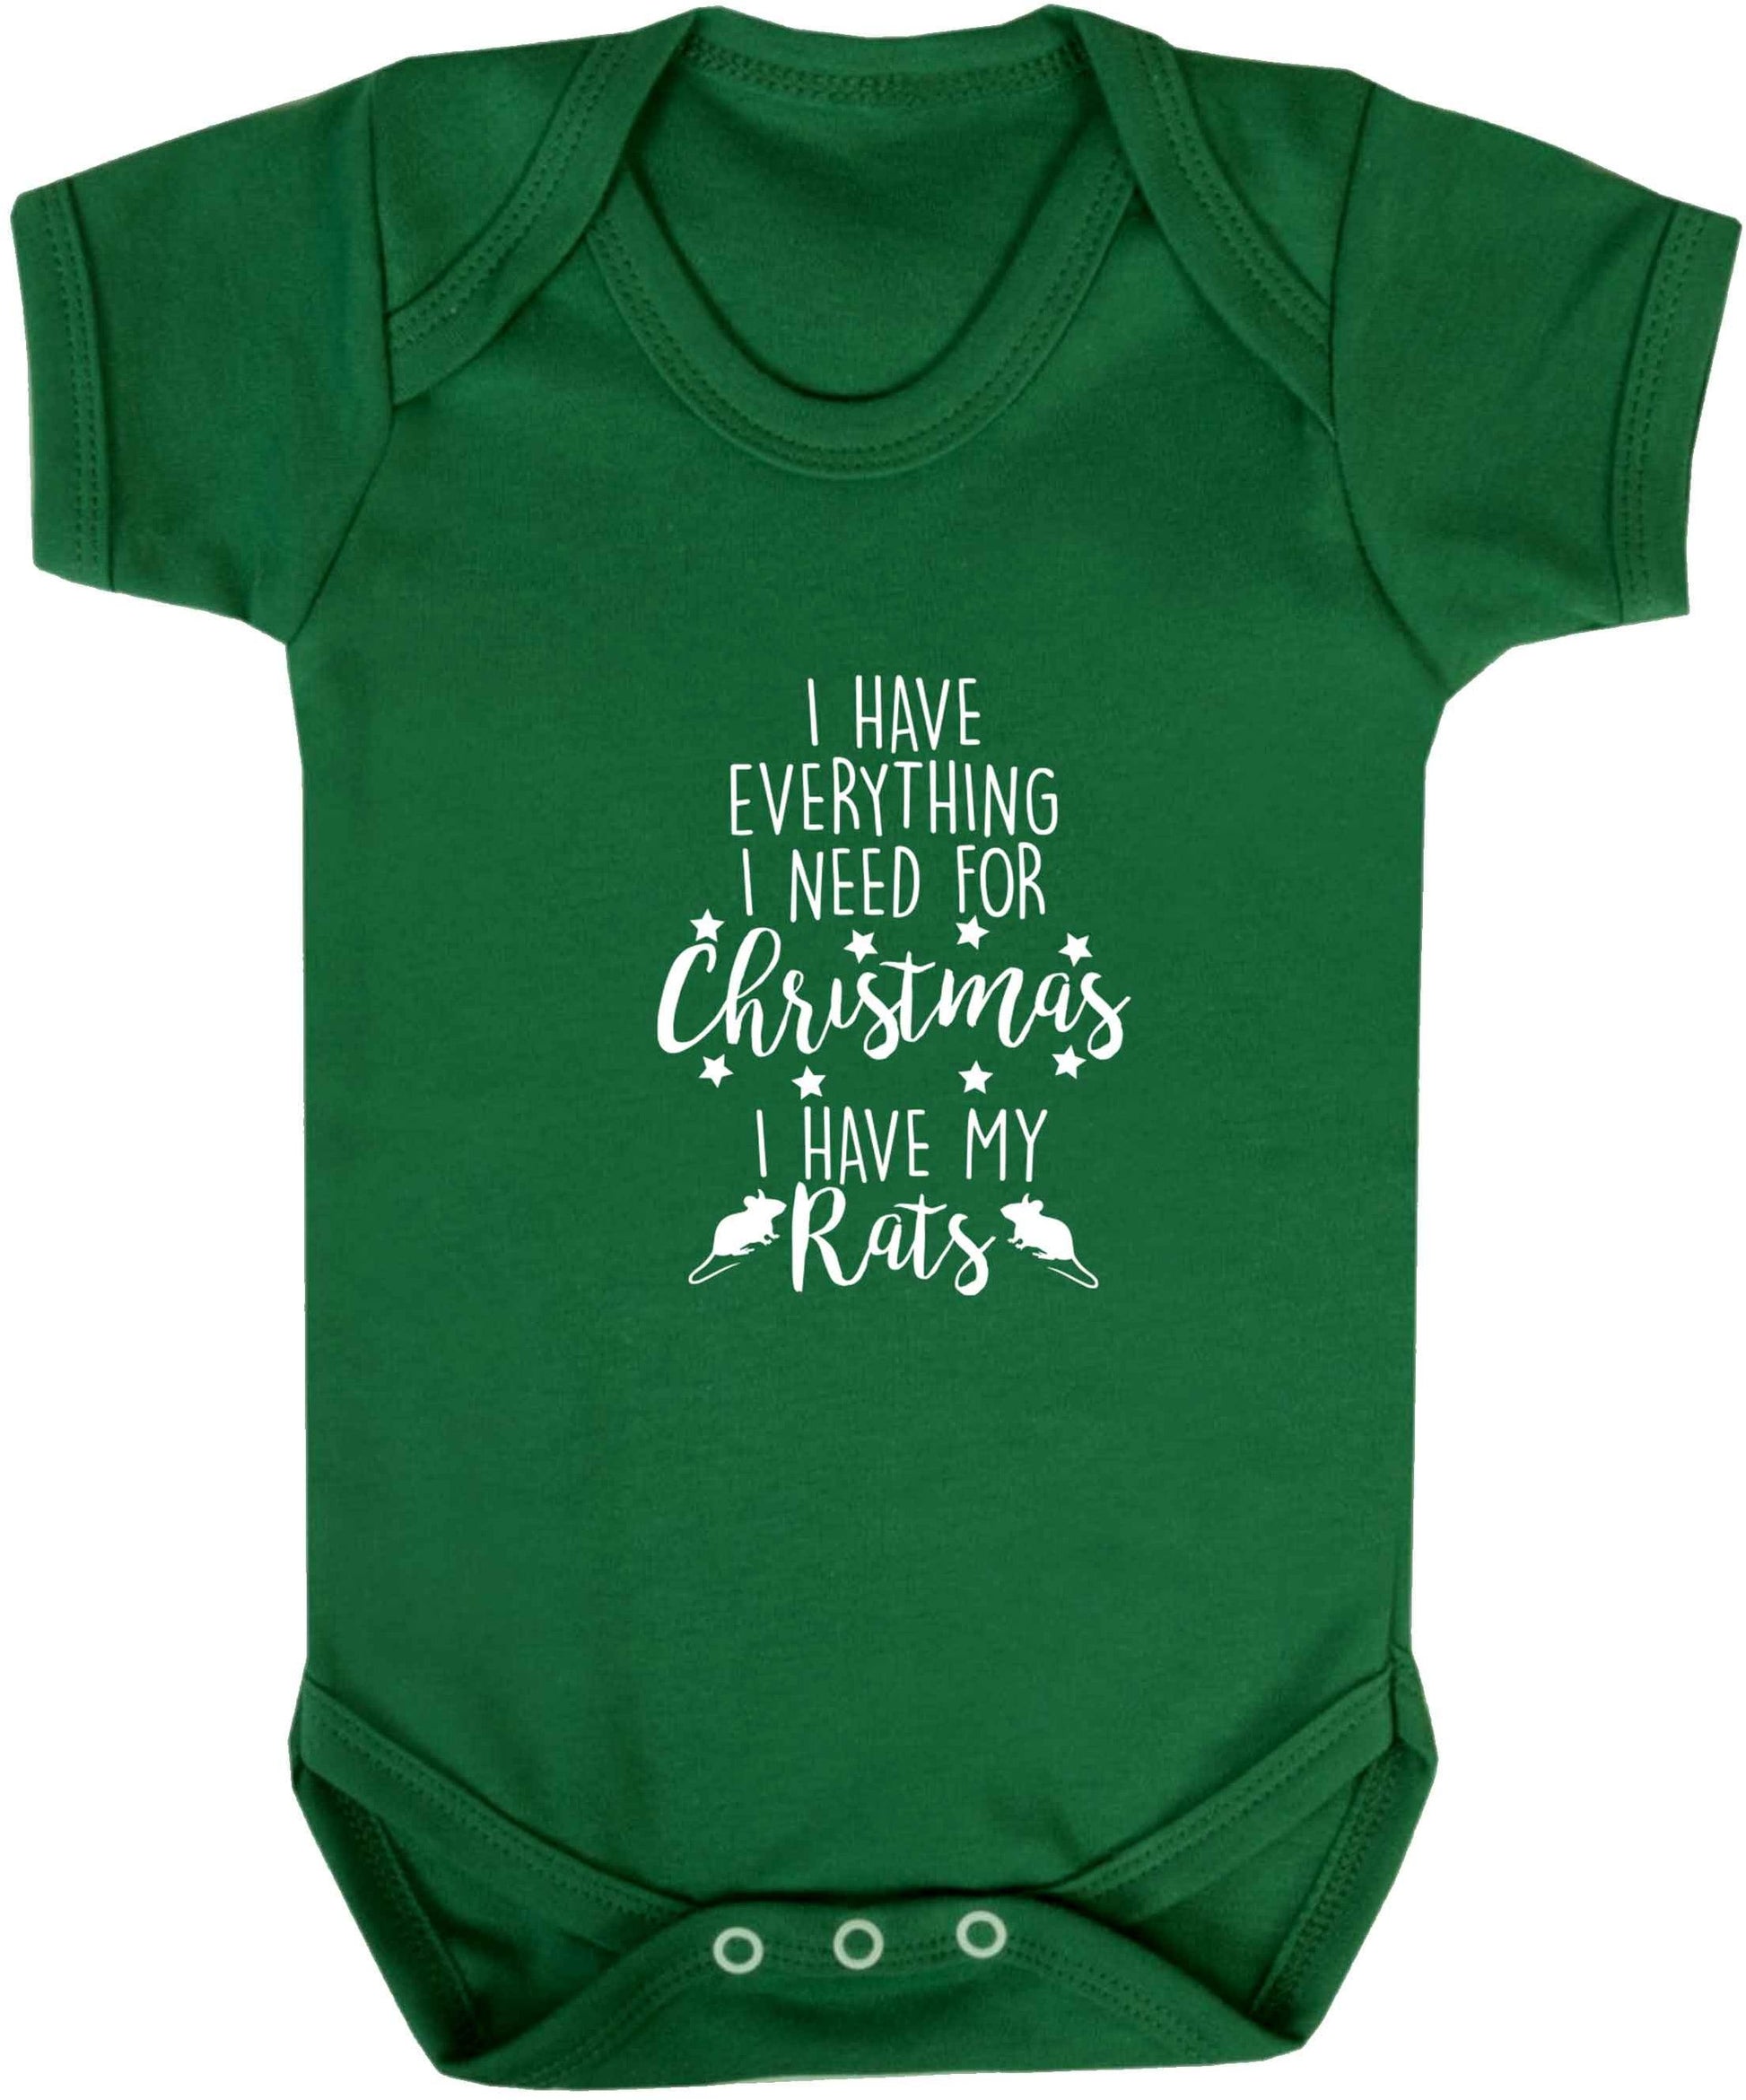 I have everything I need for Christmas I have my rats baby vest green 18-24 months